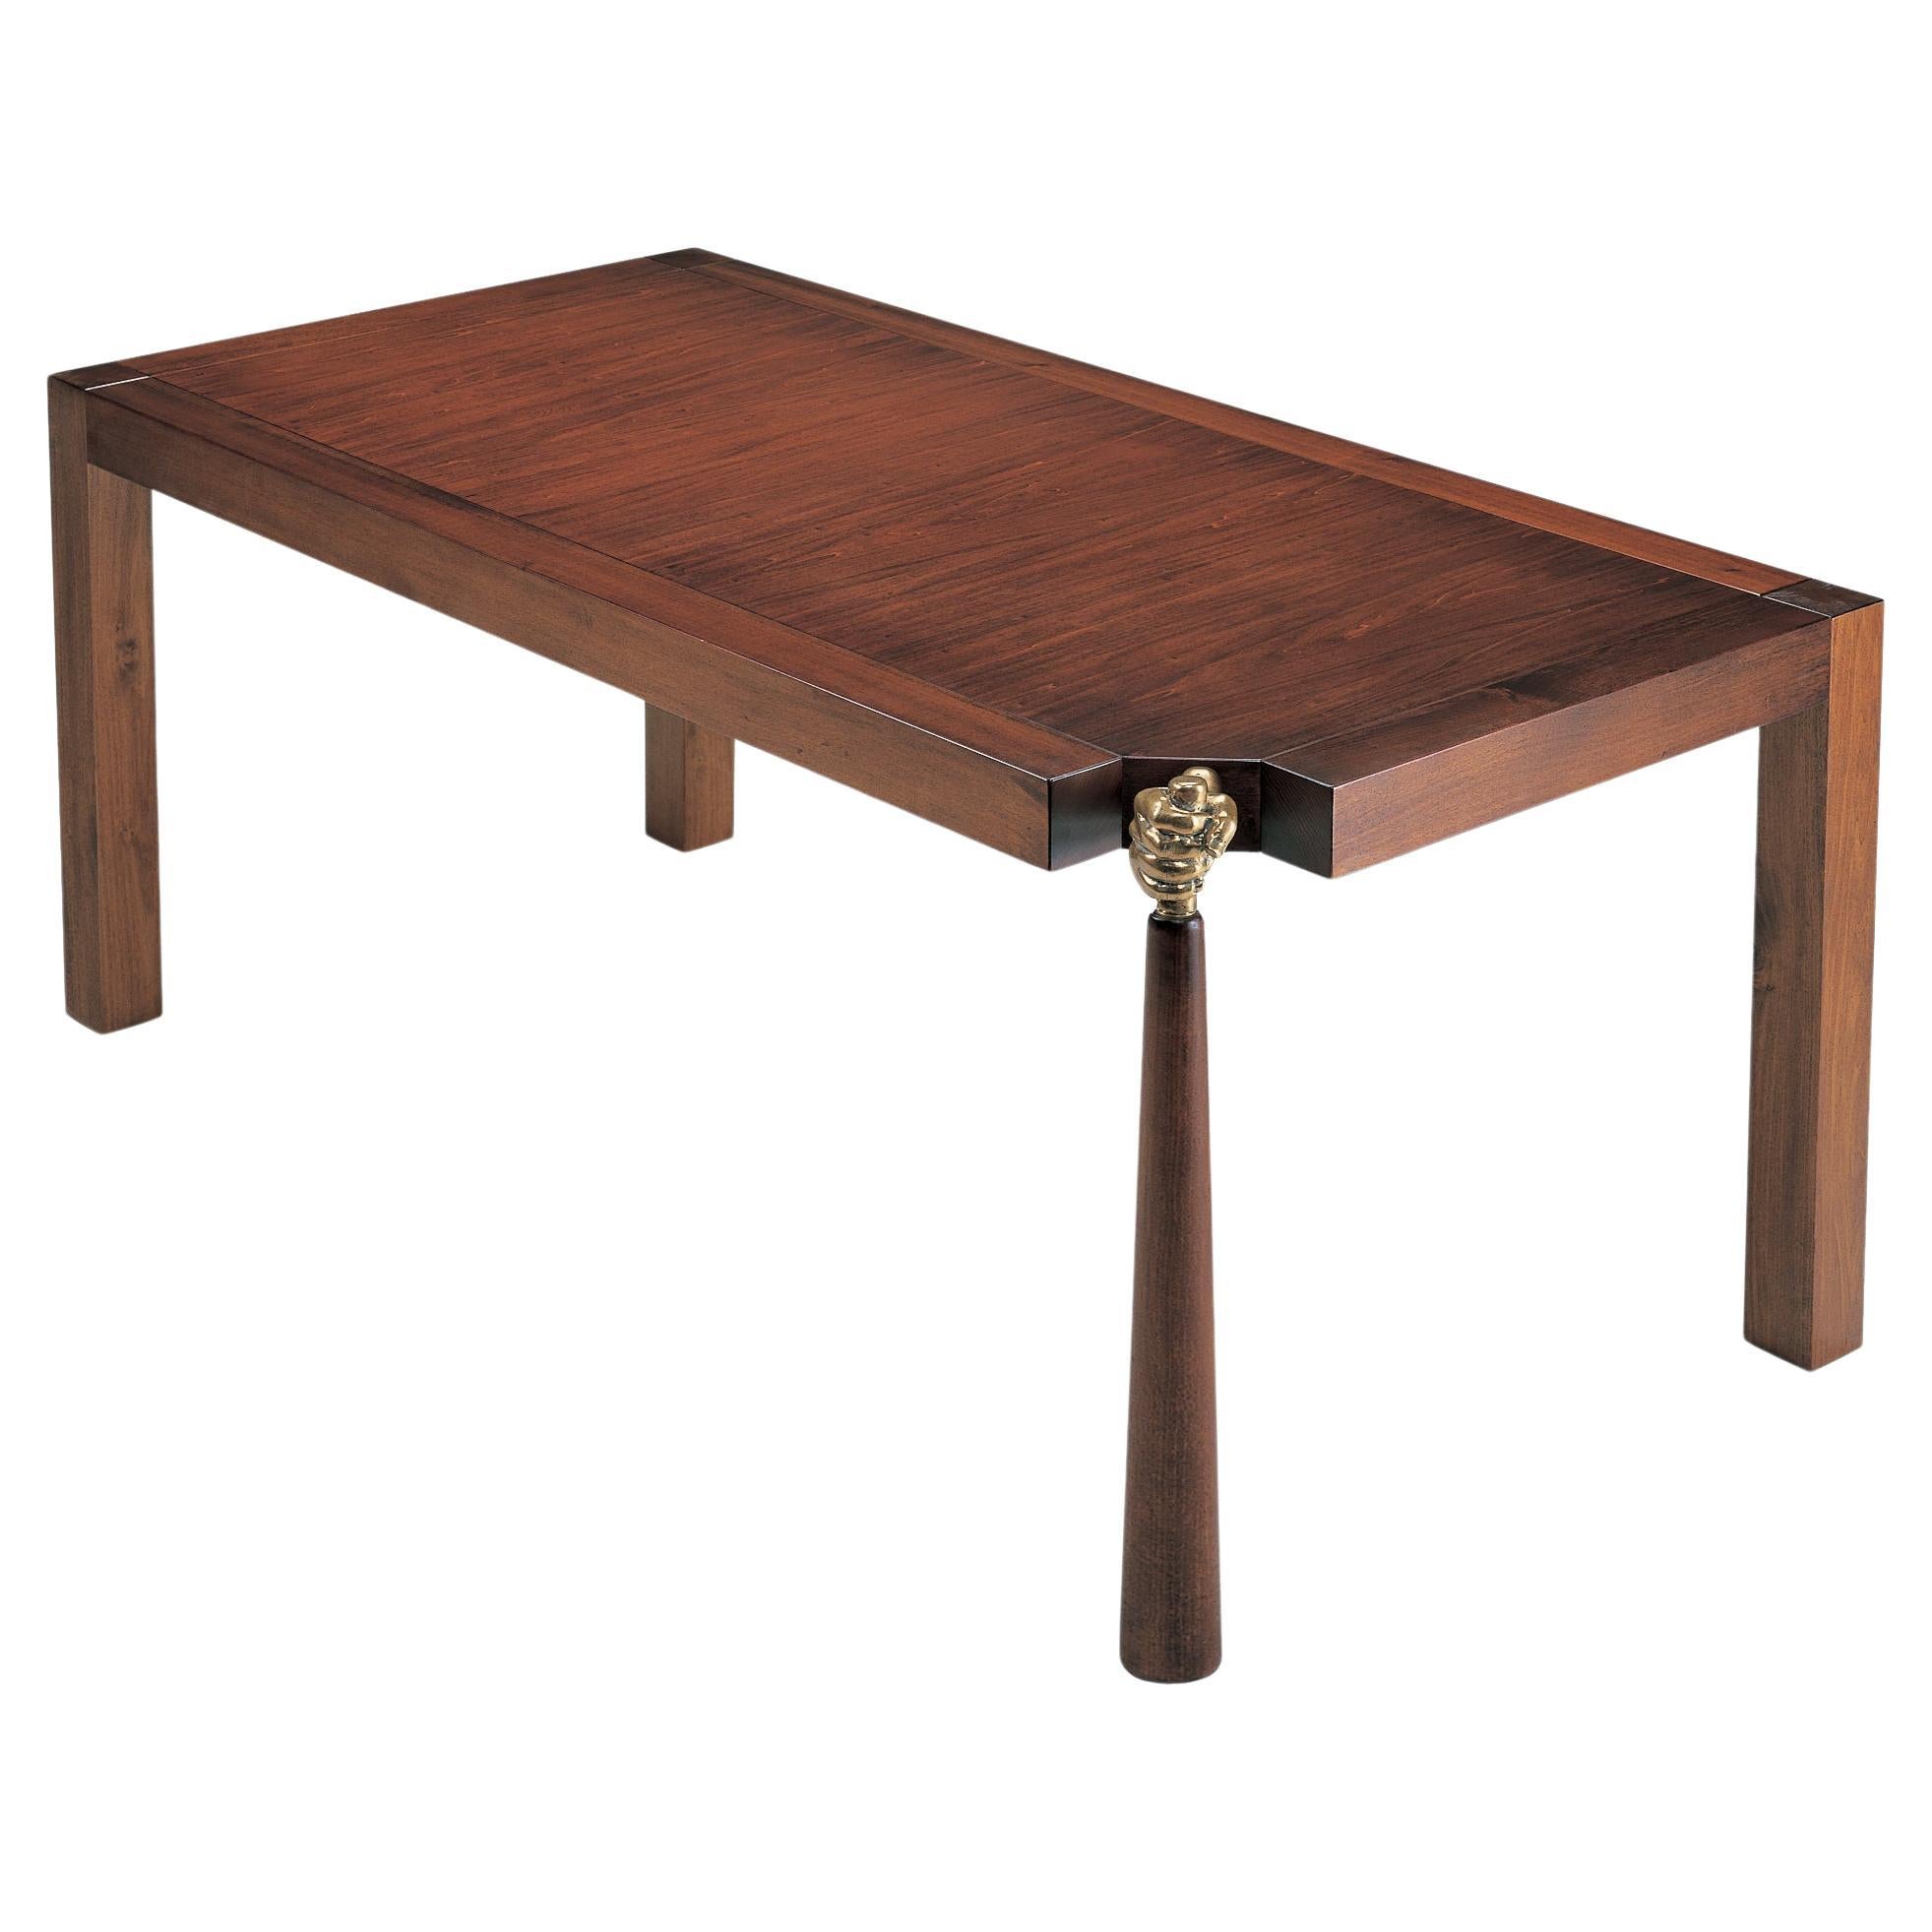 Contemporary Art Rectangular Dining Table - Mantenuto by Adolfo Natalini For Sale